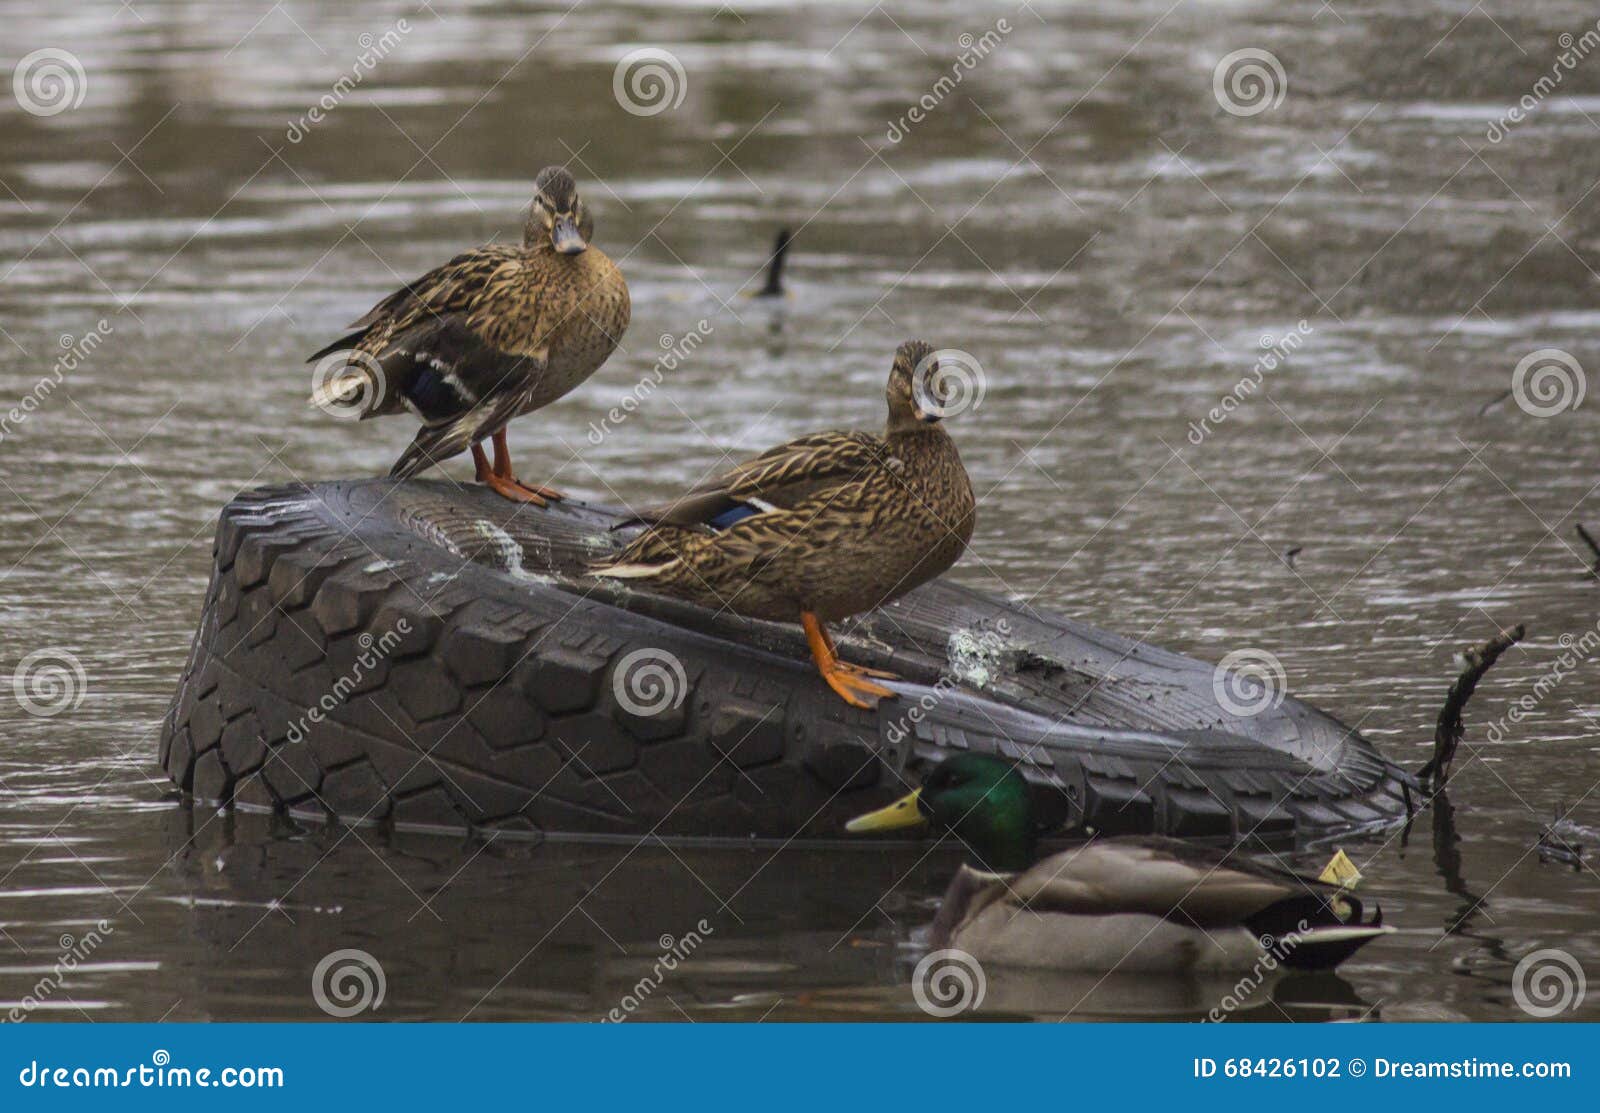 ducks on the river